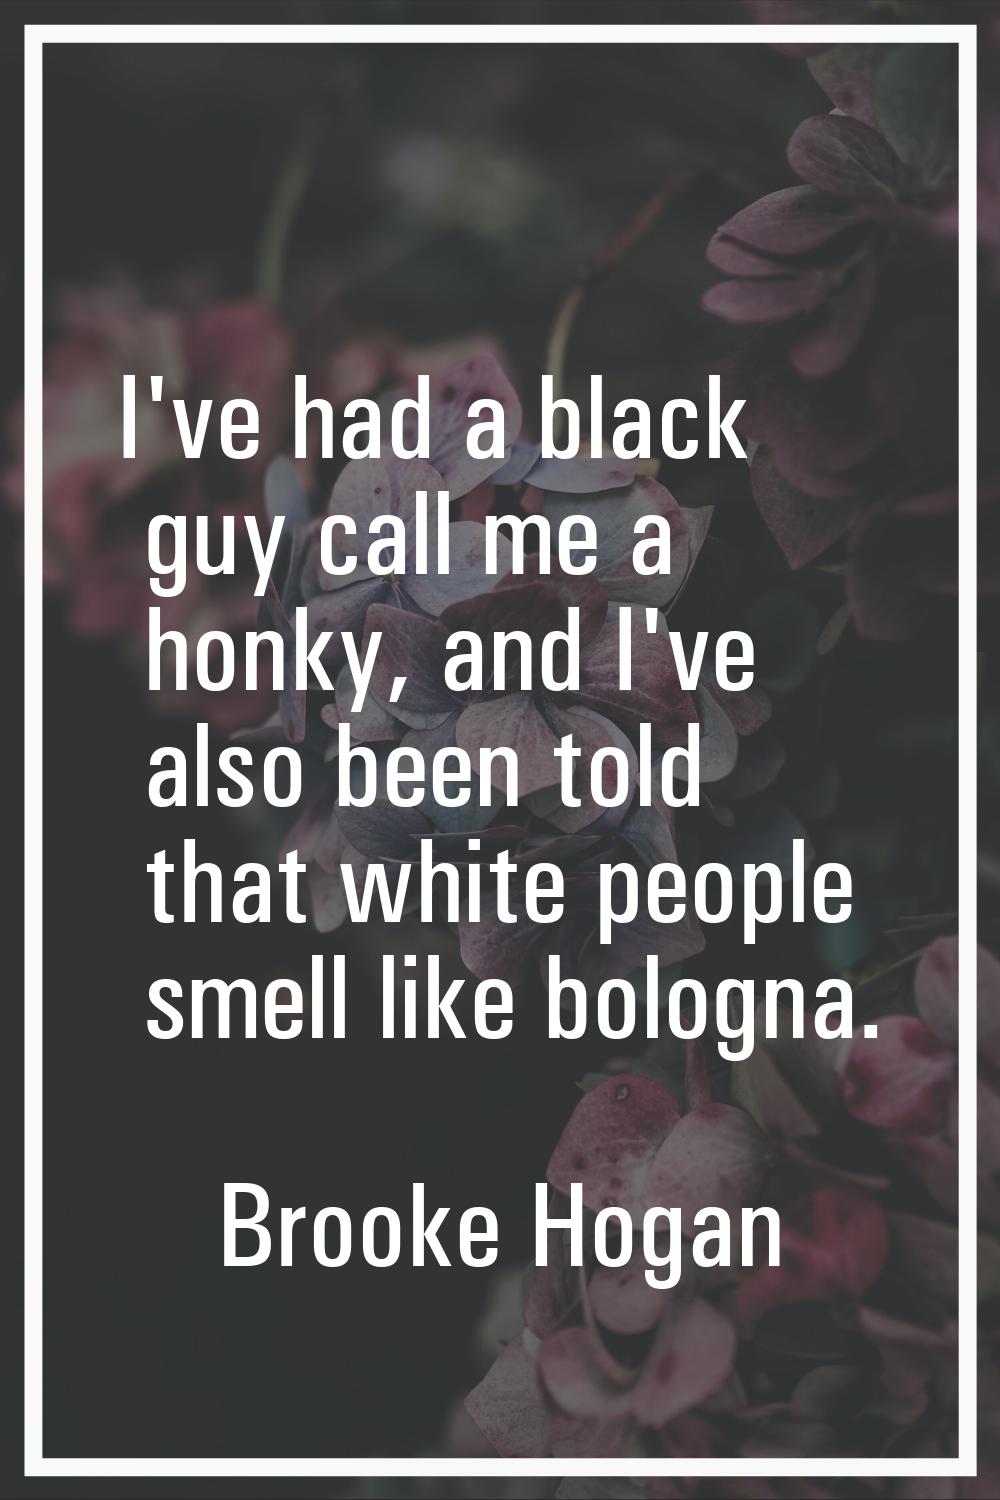 I've had a black guy call me a honky, and I've also been told that white people smell like bologna.